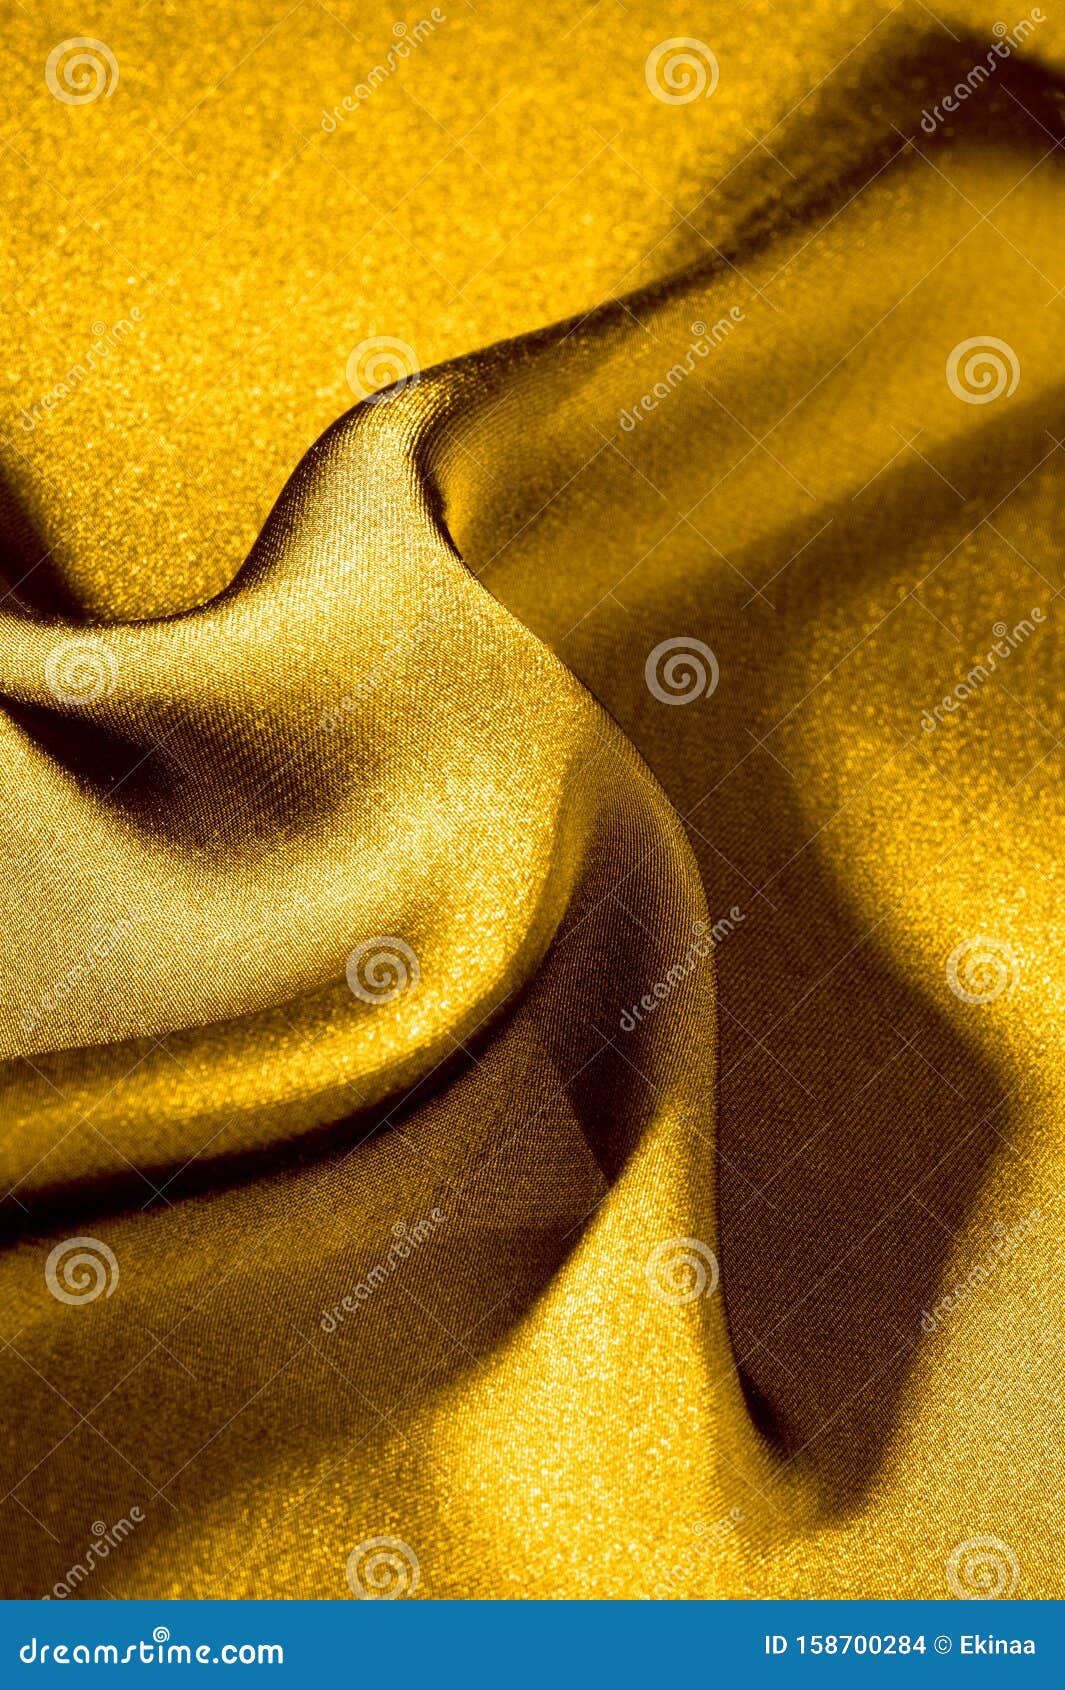 Background, Pattern, Texture, Wallpaper, Yellow Silk Fabric. Add a Touch of  Luxury To Any Design by Adding it To this Ultra-soft Stock Photo - Image of  pattern, fold: 158700284